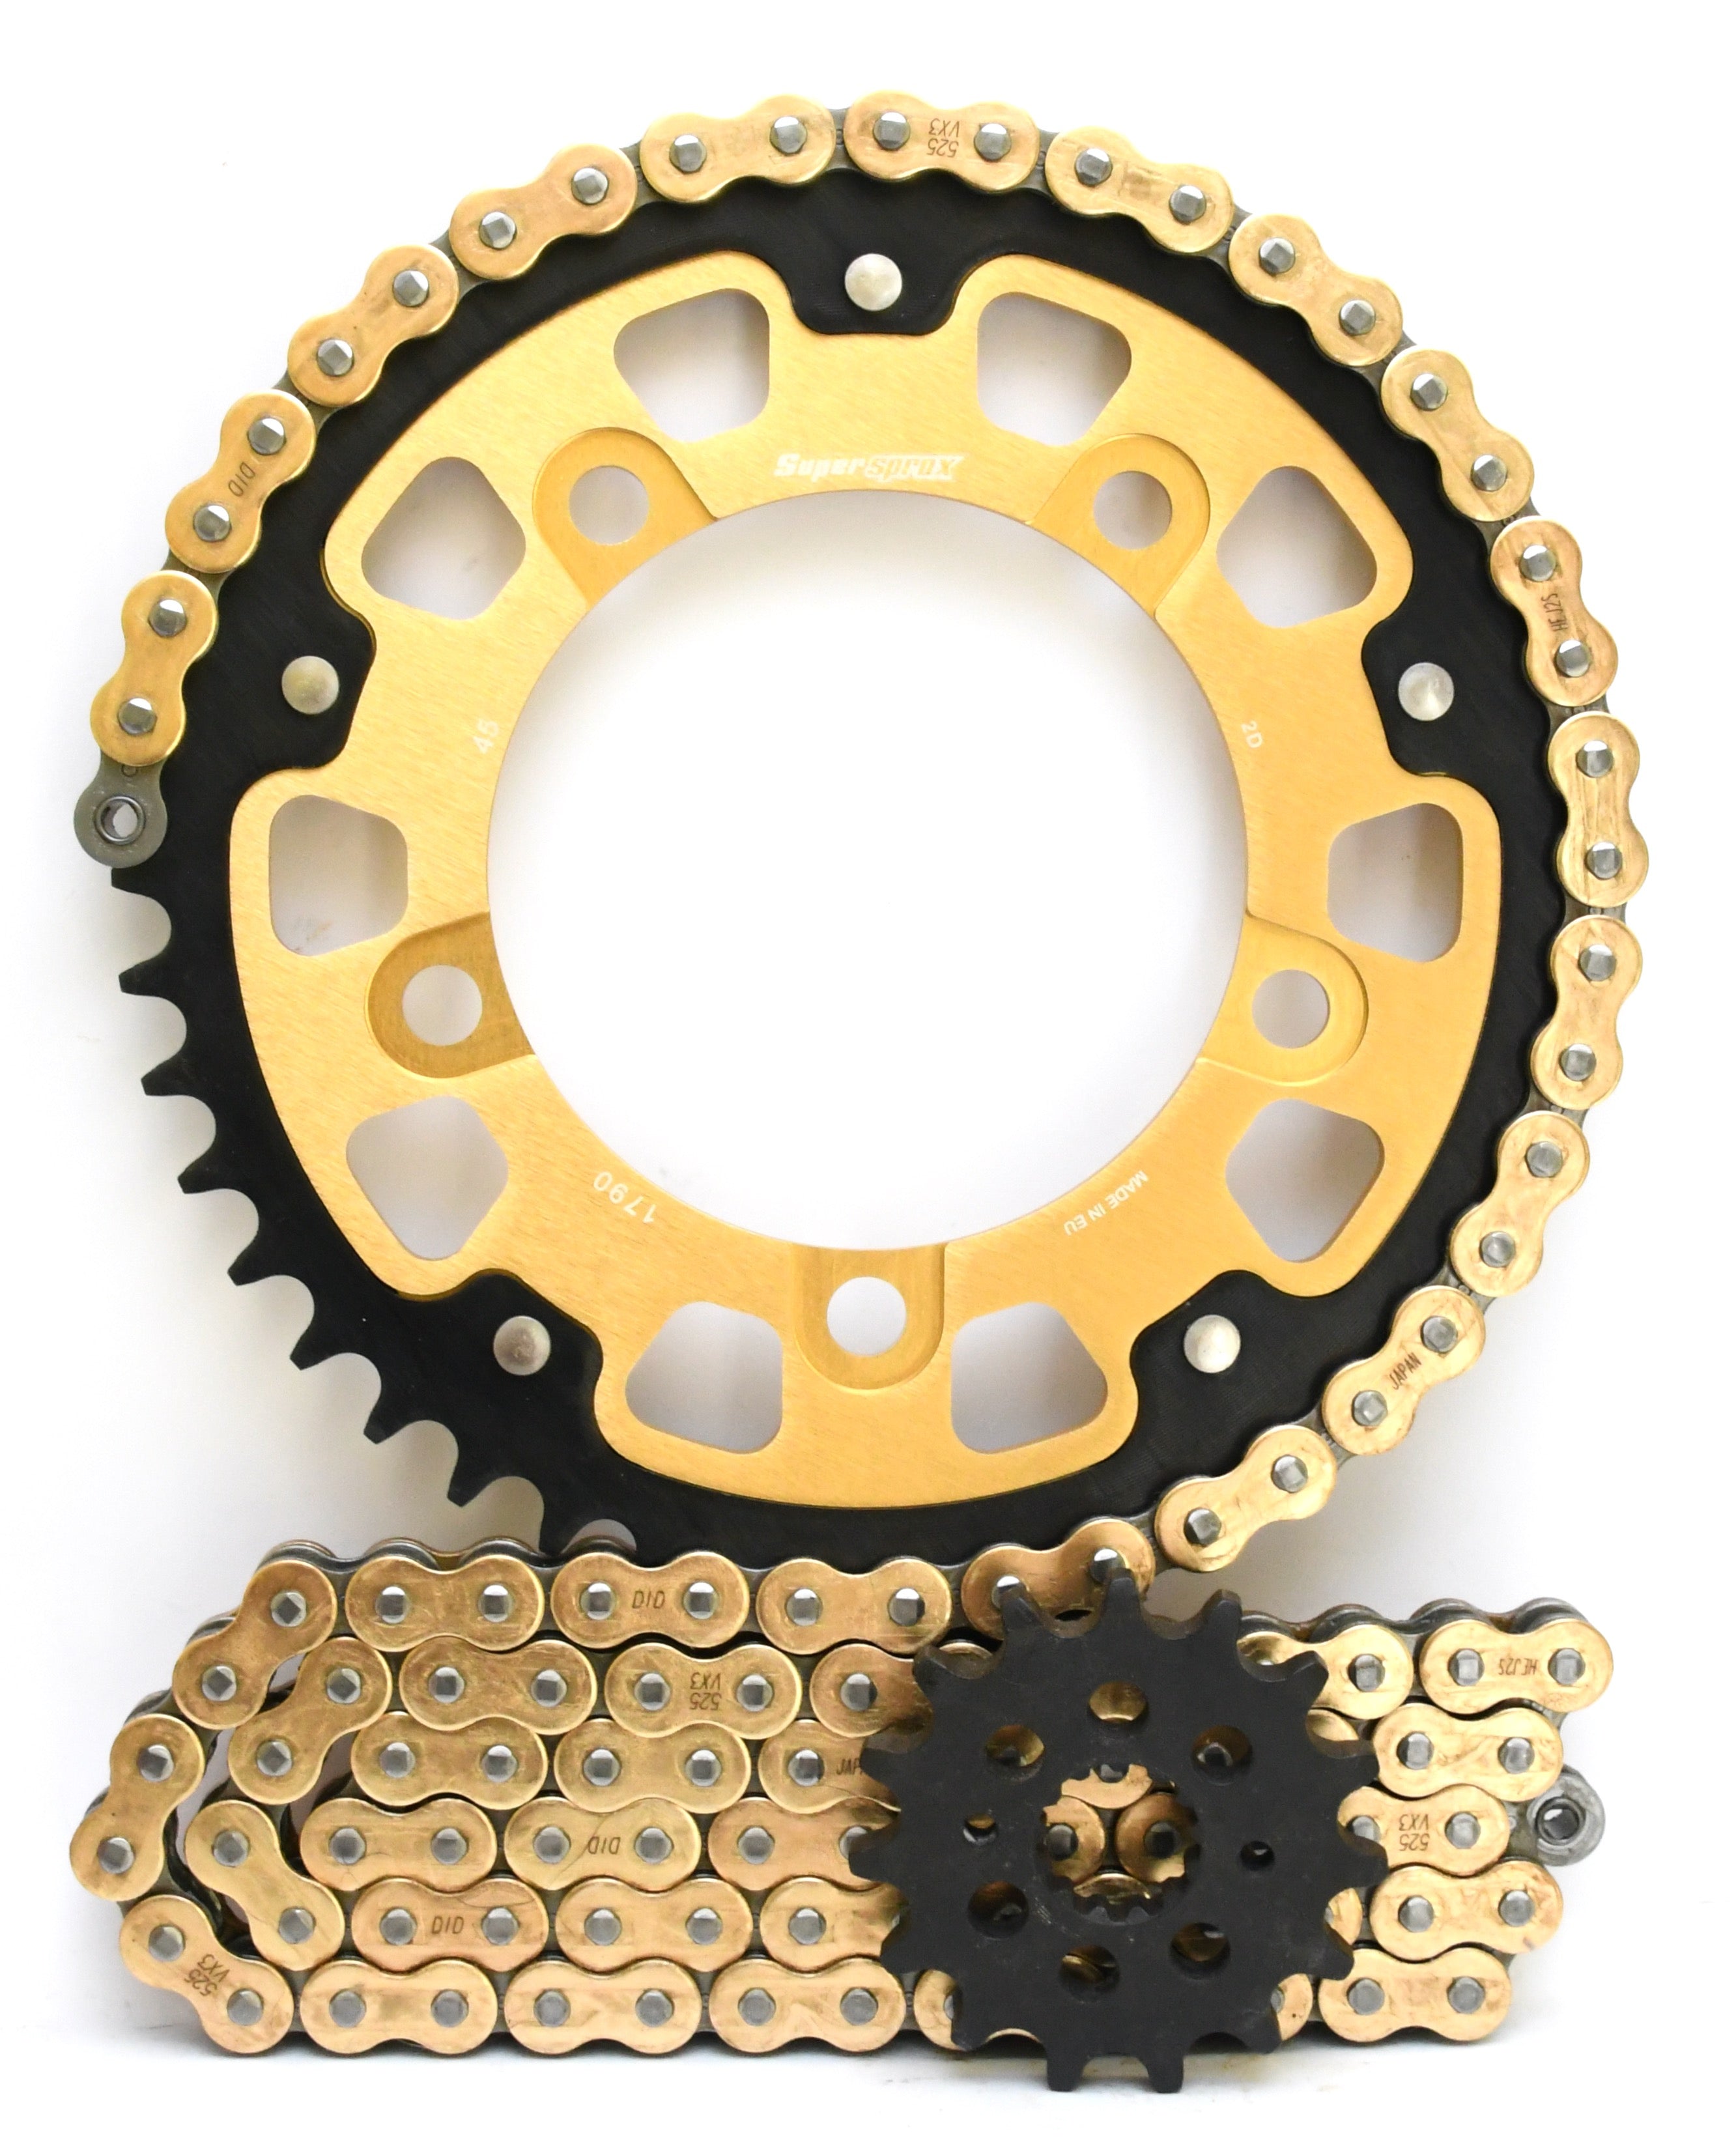 Supersprox Chain and Sprocket Kit - BMW S1000RR 2019> - Standard Gearing